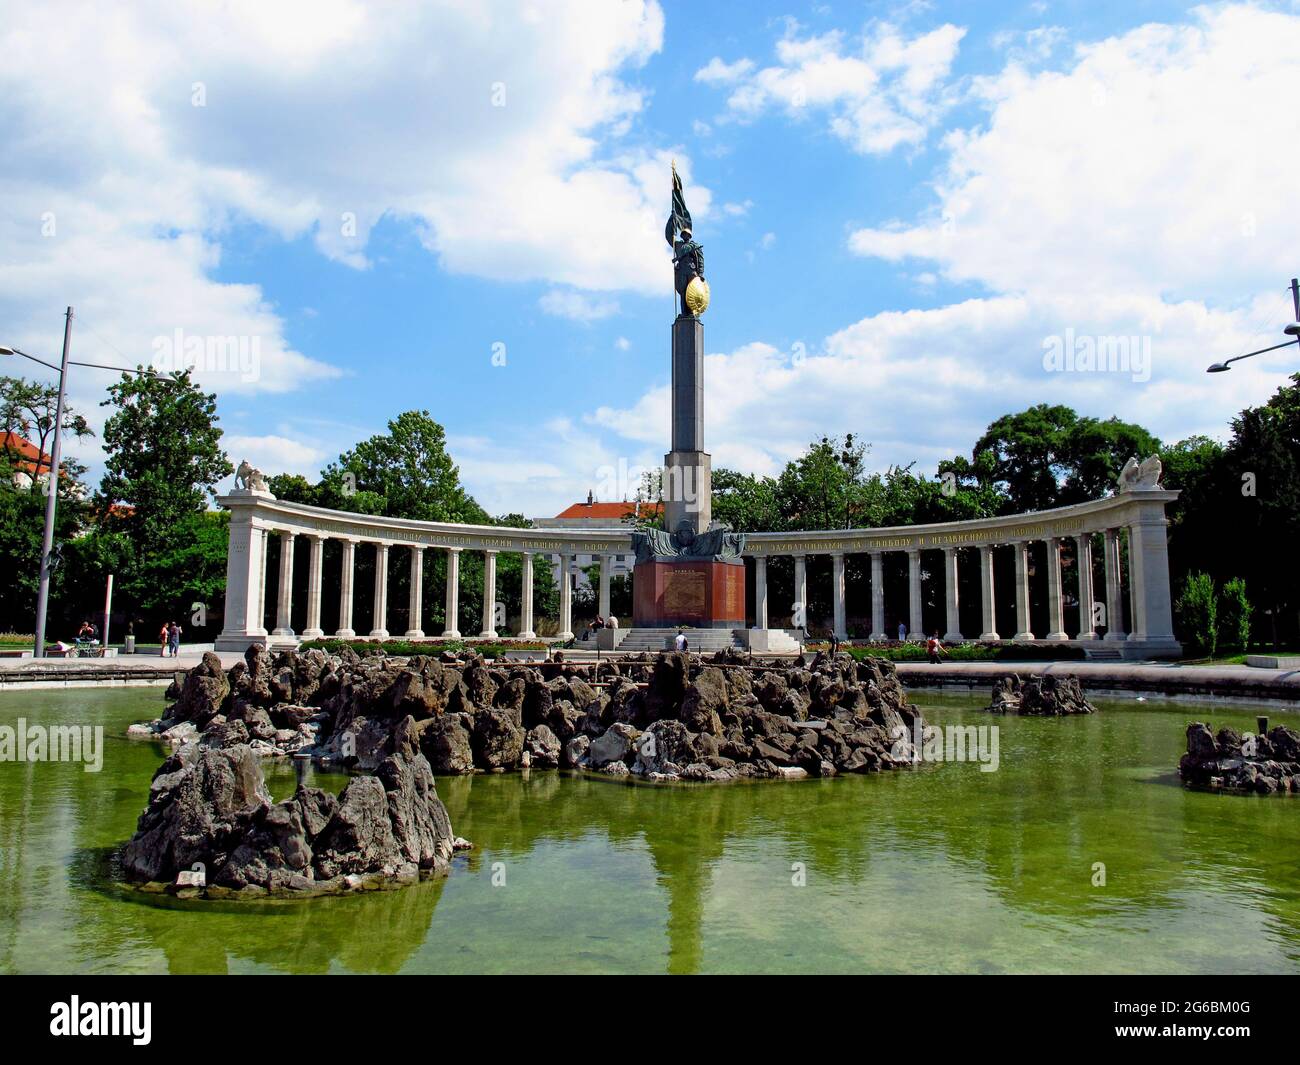 The monument to Soviet troops in Vienna, Austria Stock Photo